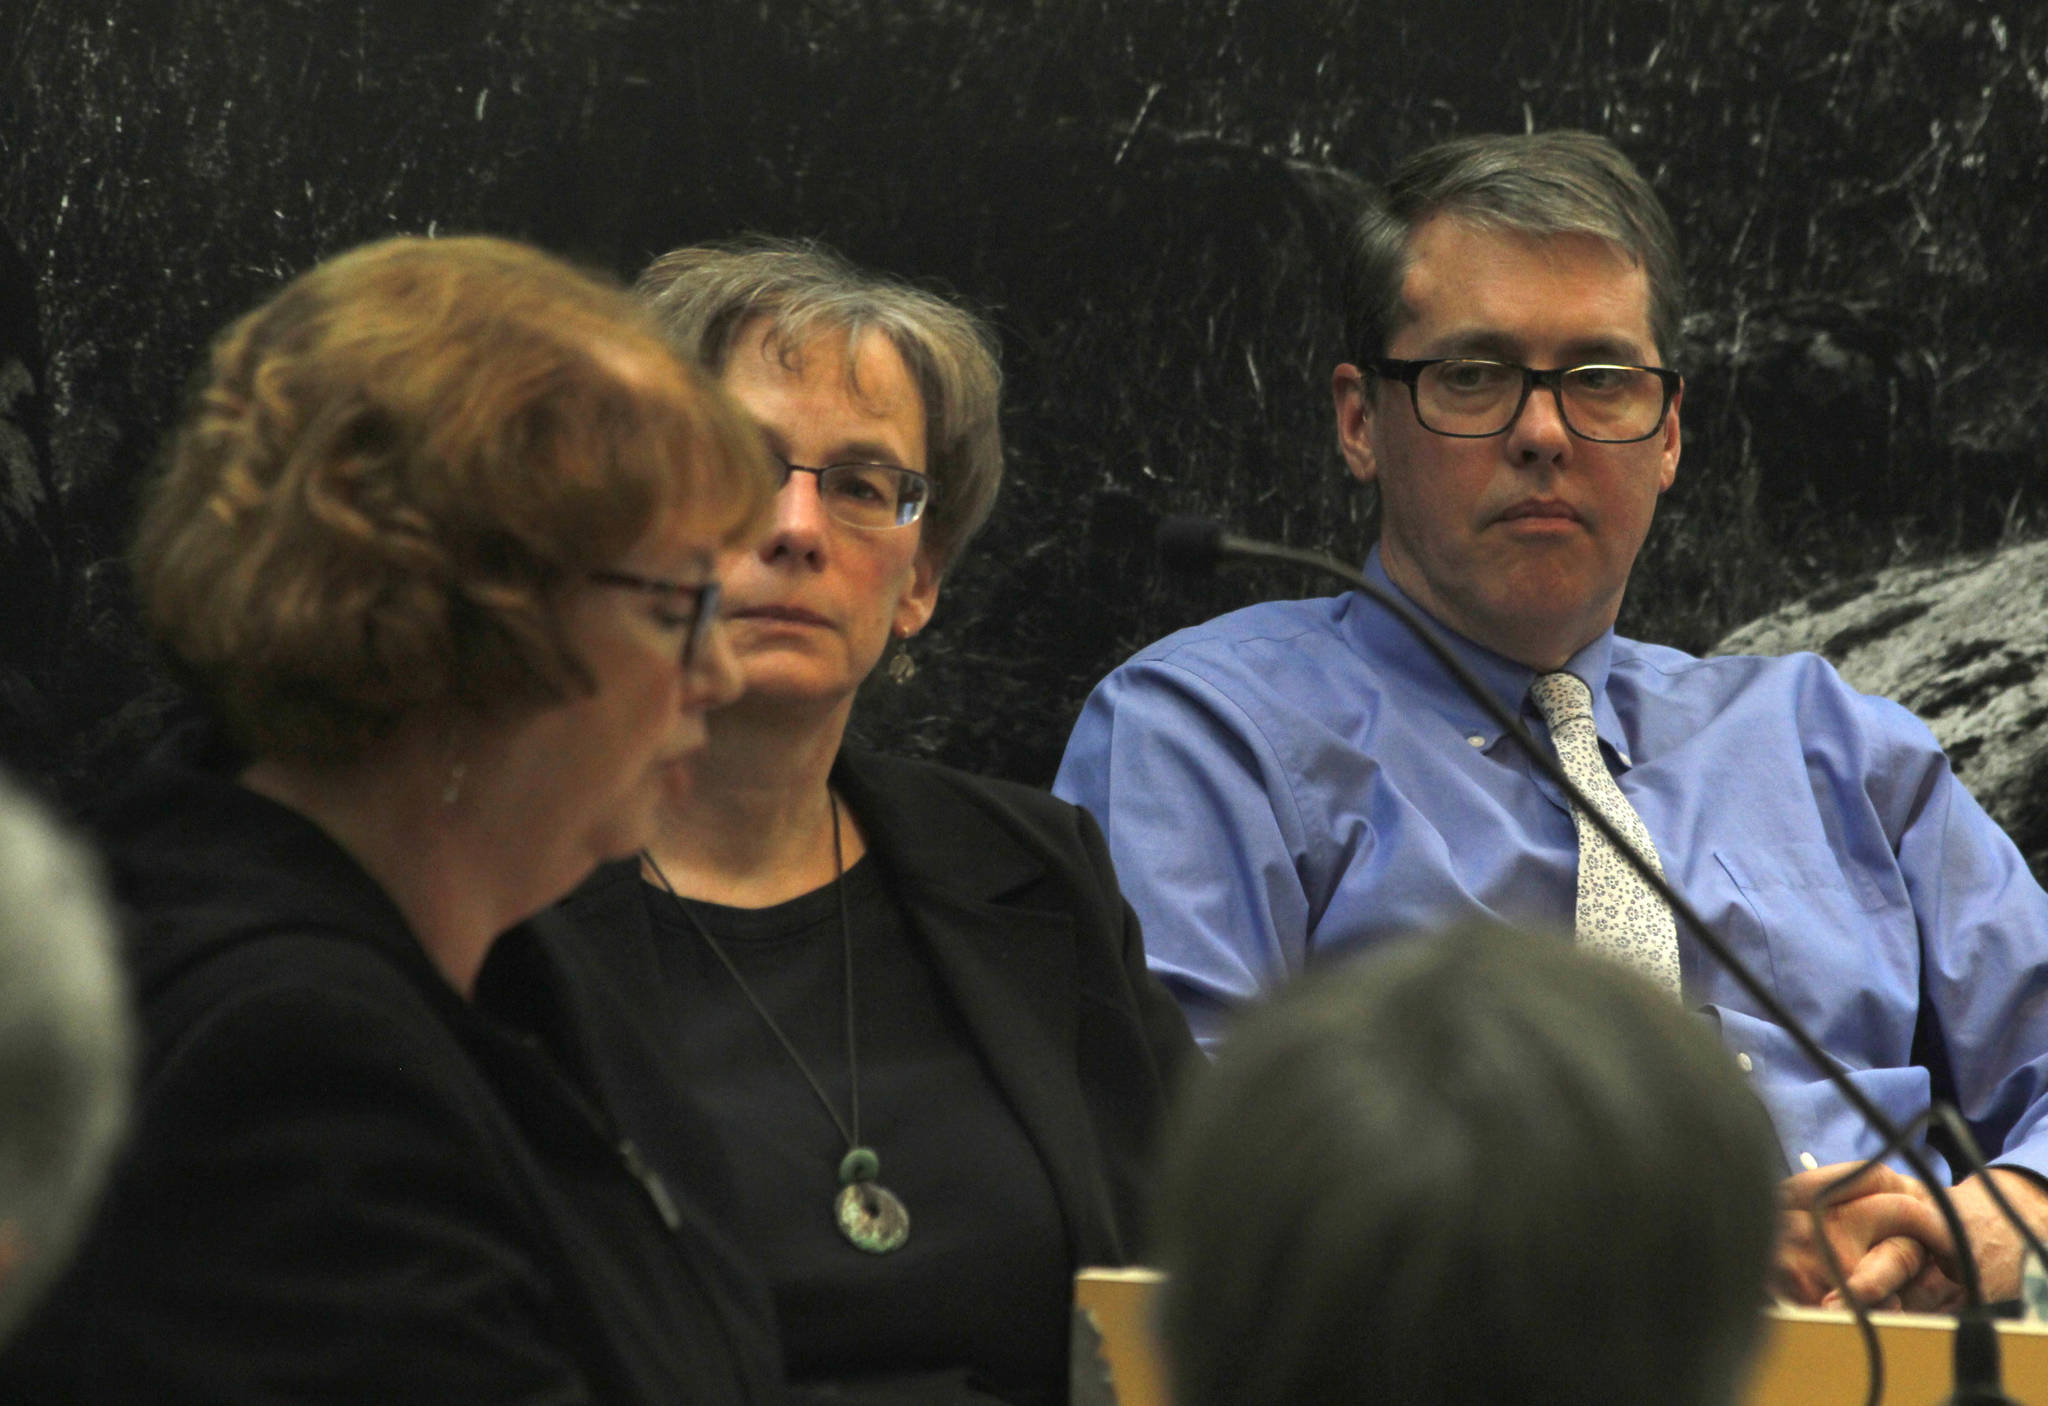 Deputy City Manager Mila Cosgrove, center, and City Manager Rorie Watt, right, listen to the testimony of Janet Clarke-Kennedy at Monday’s City and Borough of Juneau Assembly meeting. Despite arguments from Clarke-Kennedy and 16 other members of the public asking them not to go forward with expanding the city’s borders farther on Admiralty Island, the Assembly members voted by a 5-4 count to go ahead with it. (Alex McCarthy | Juneau Empire)